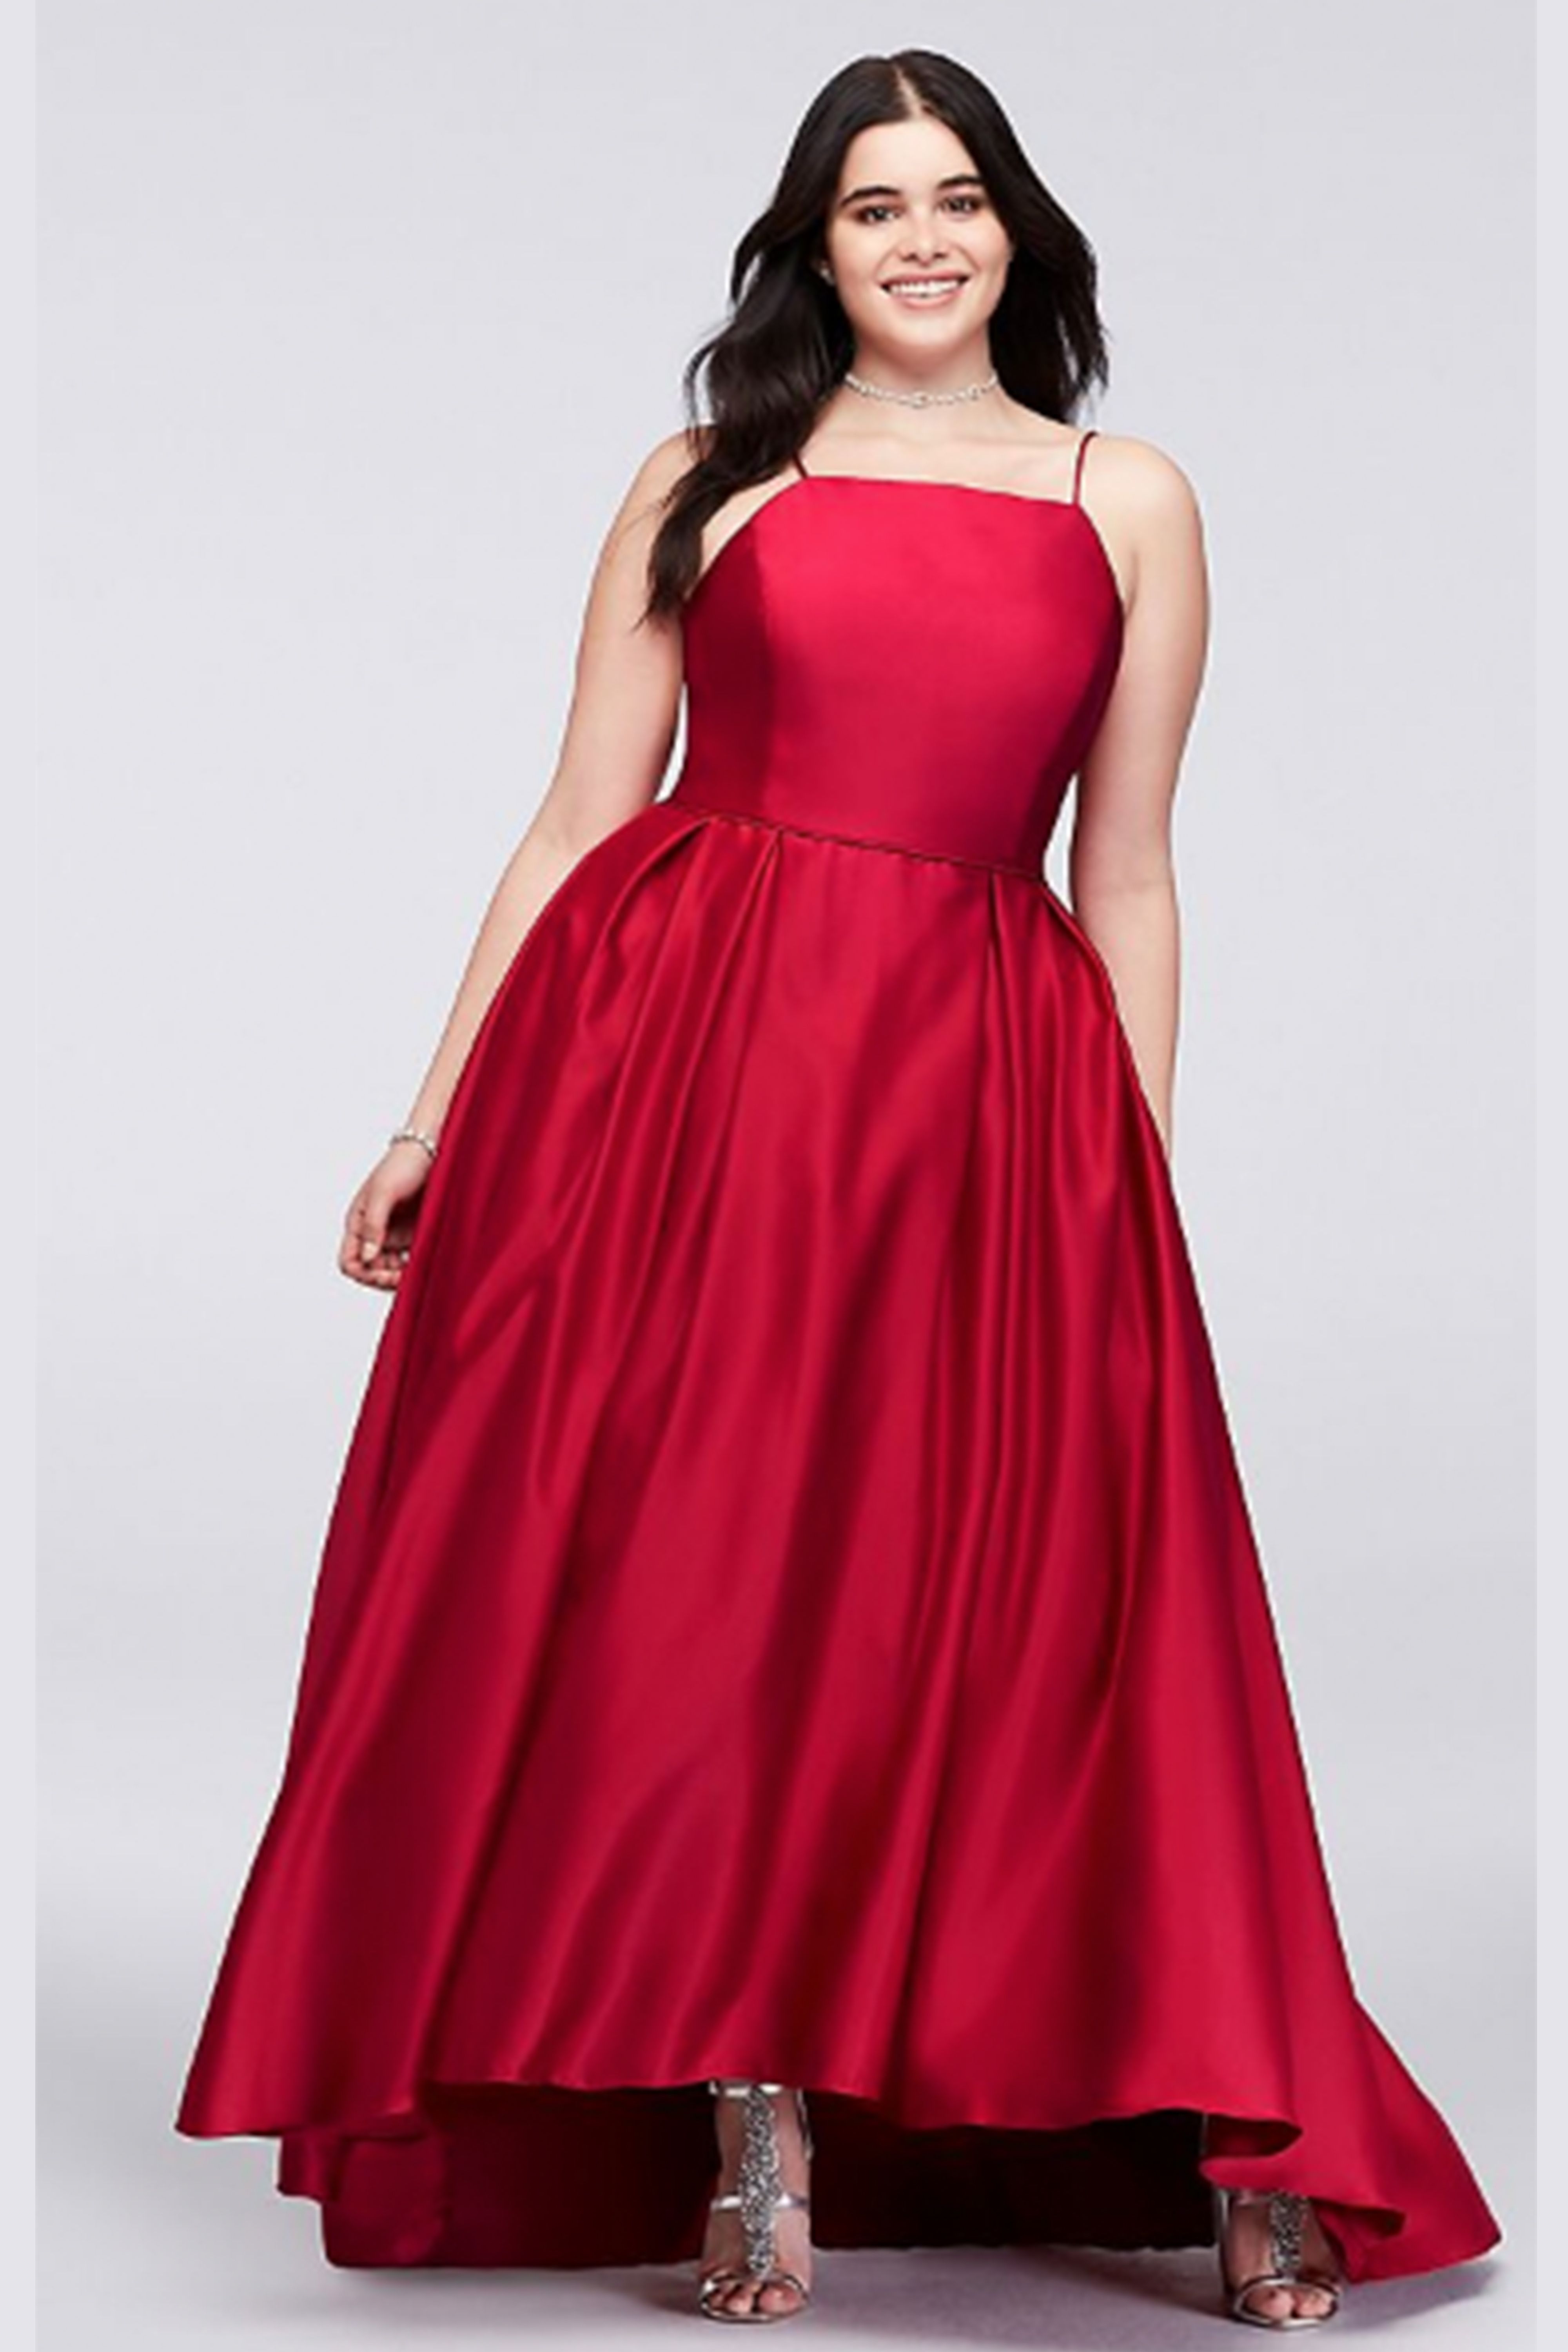 Best Red Prom Dresses for 2018 Red Formal Dresses for Prom